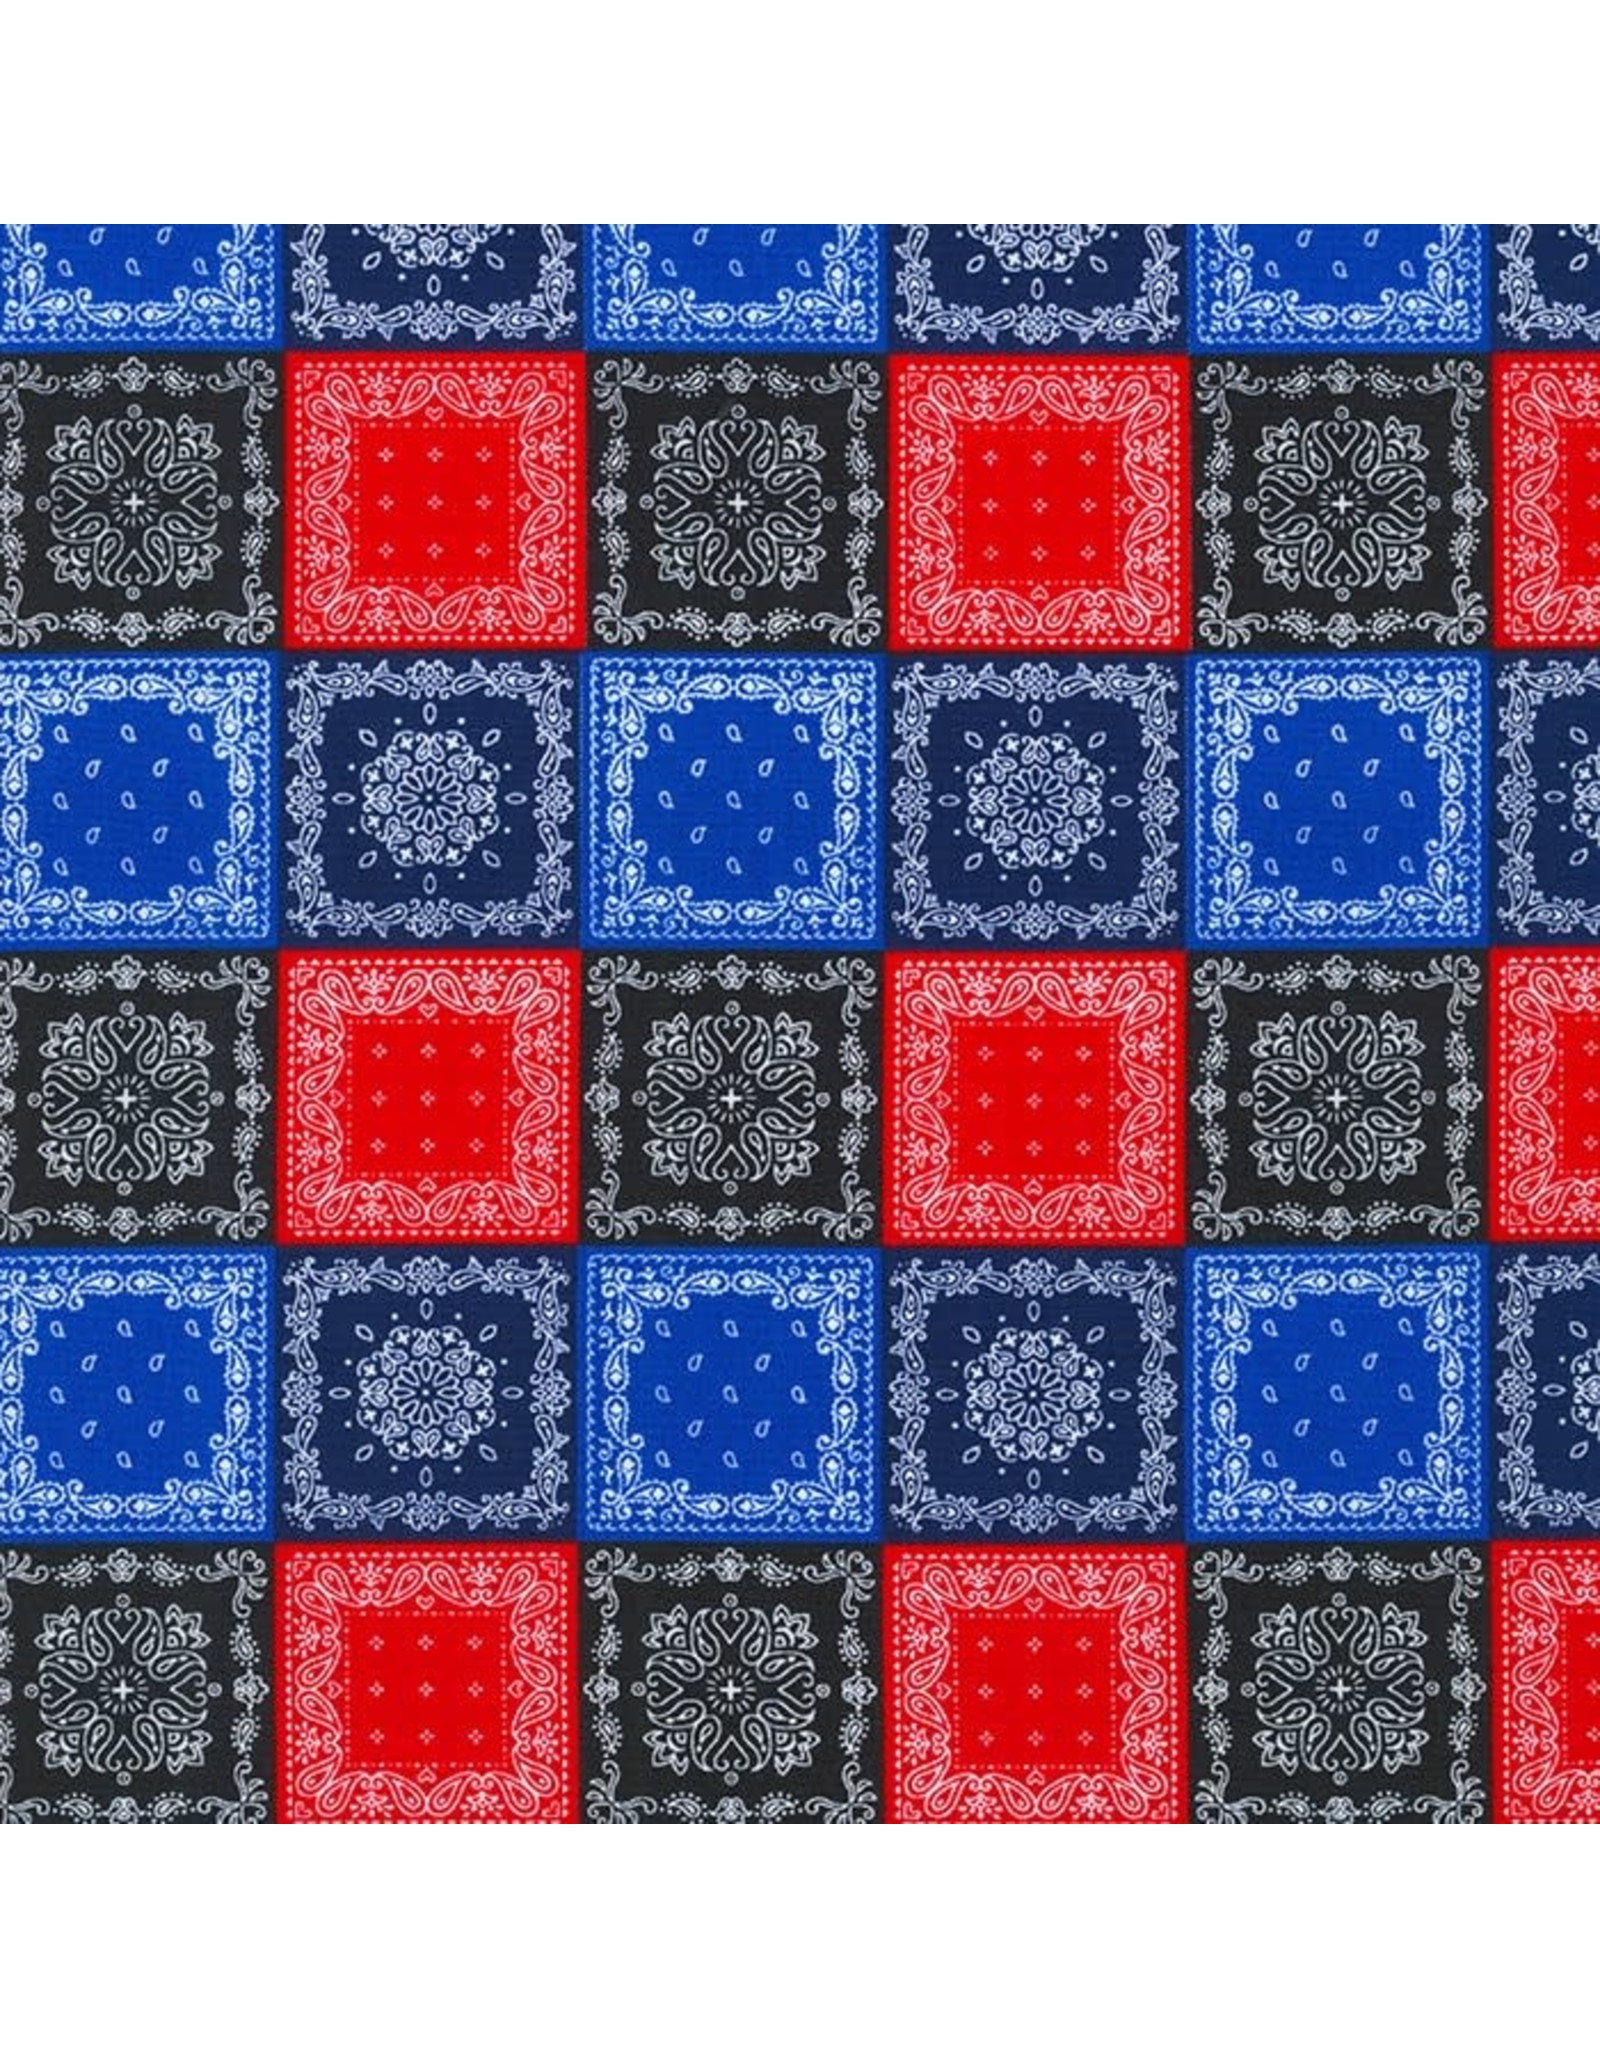 Denim Blue and Red Patchwork Print, Quilting Fabric, 100% Cotton, 44  wide